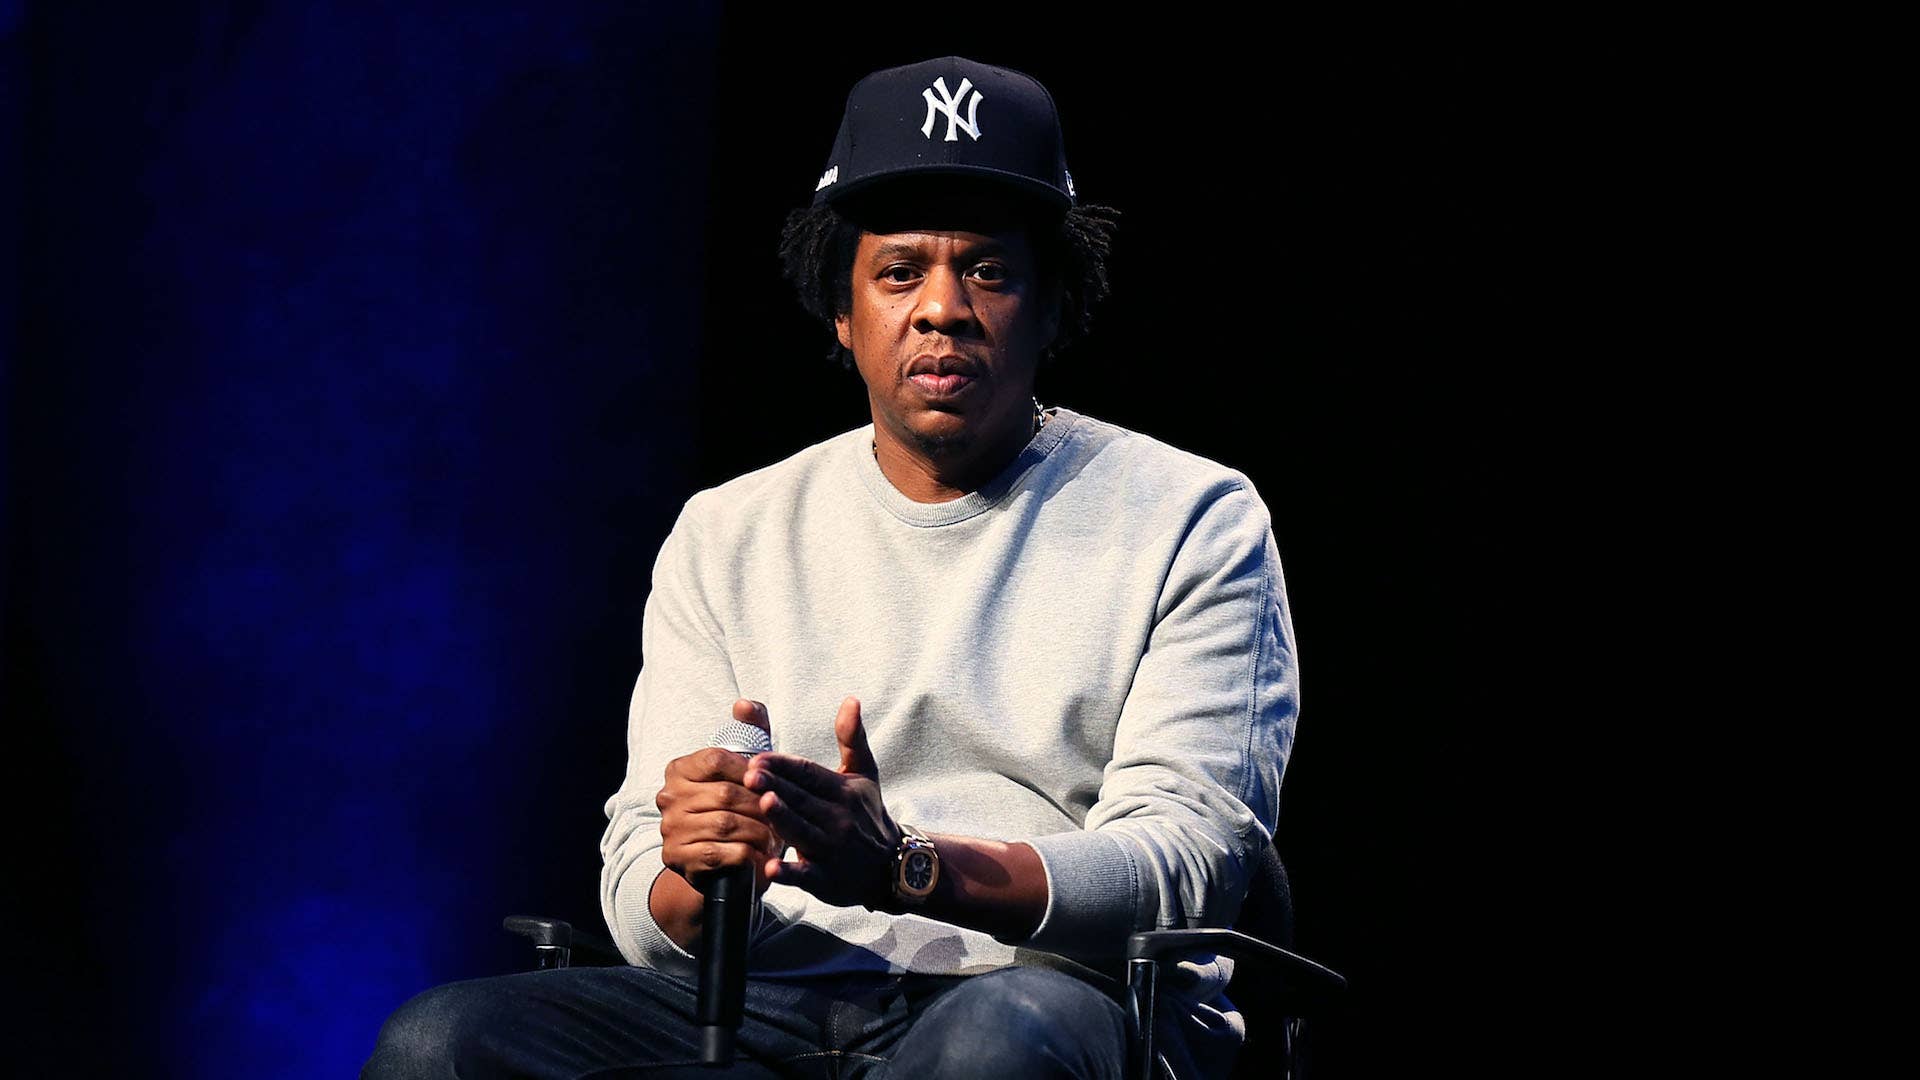 Shawn 'Jay Z' Carter attends Criminal Justice Reform Organization Launch.